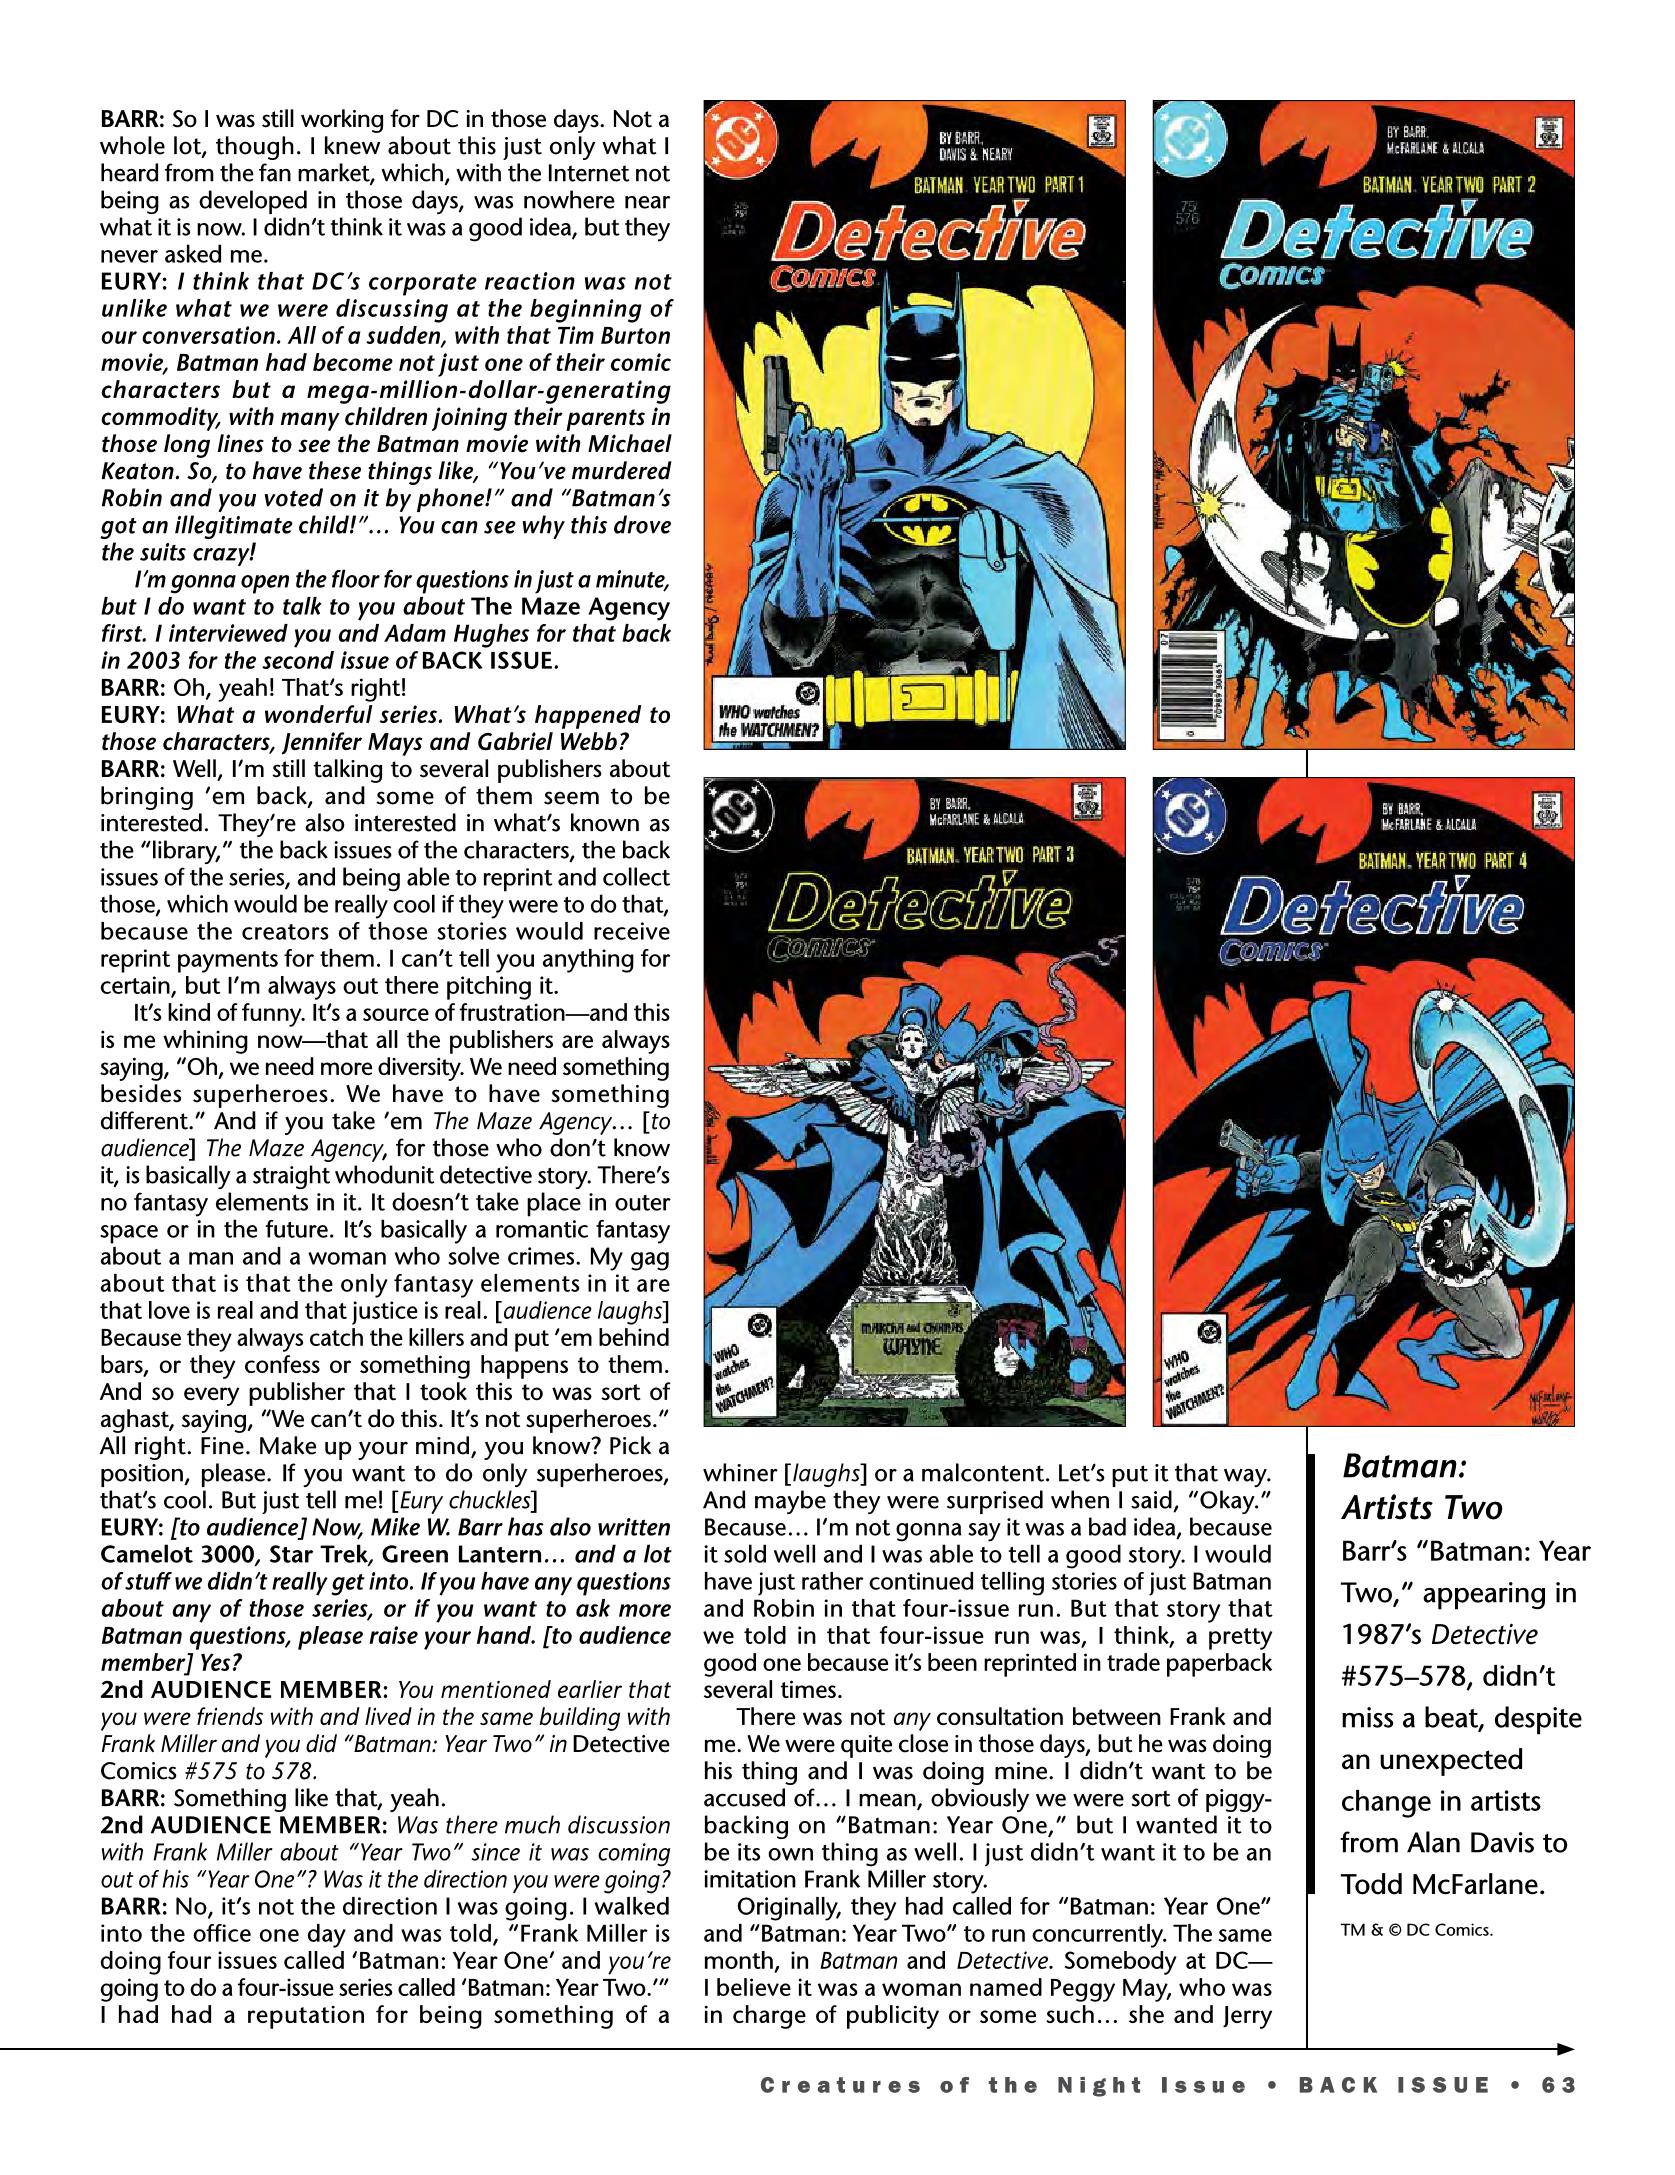 Read online Back Issue comic -  Issue #95 - 62